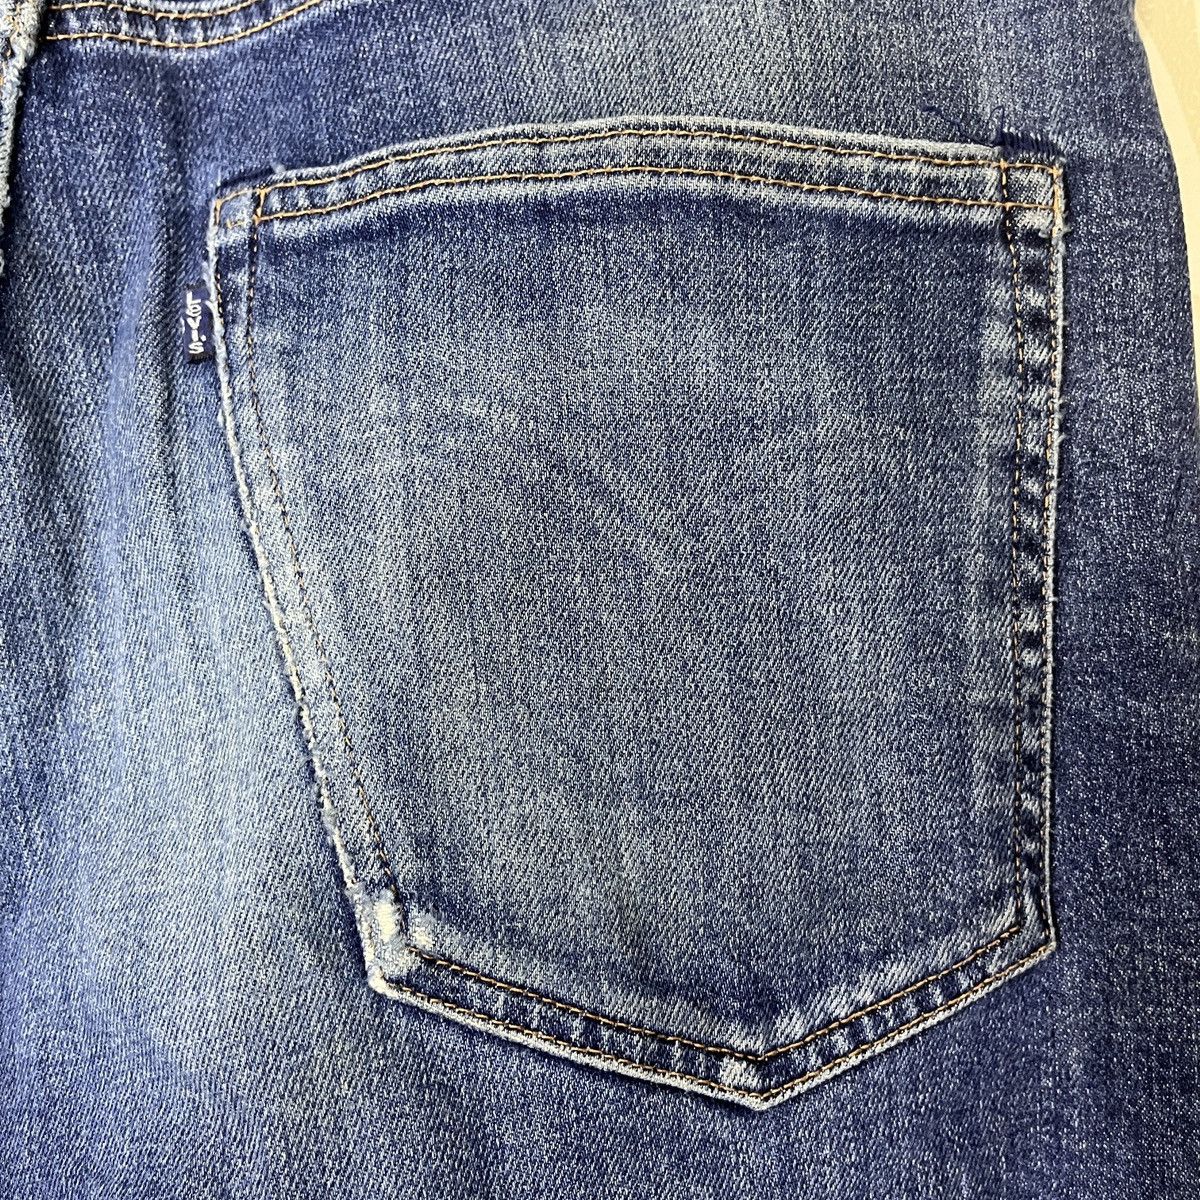 Levis Made & Crafted Blue Label Distressed Denim Jeans - 20